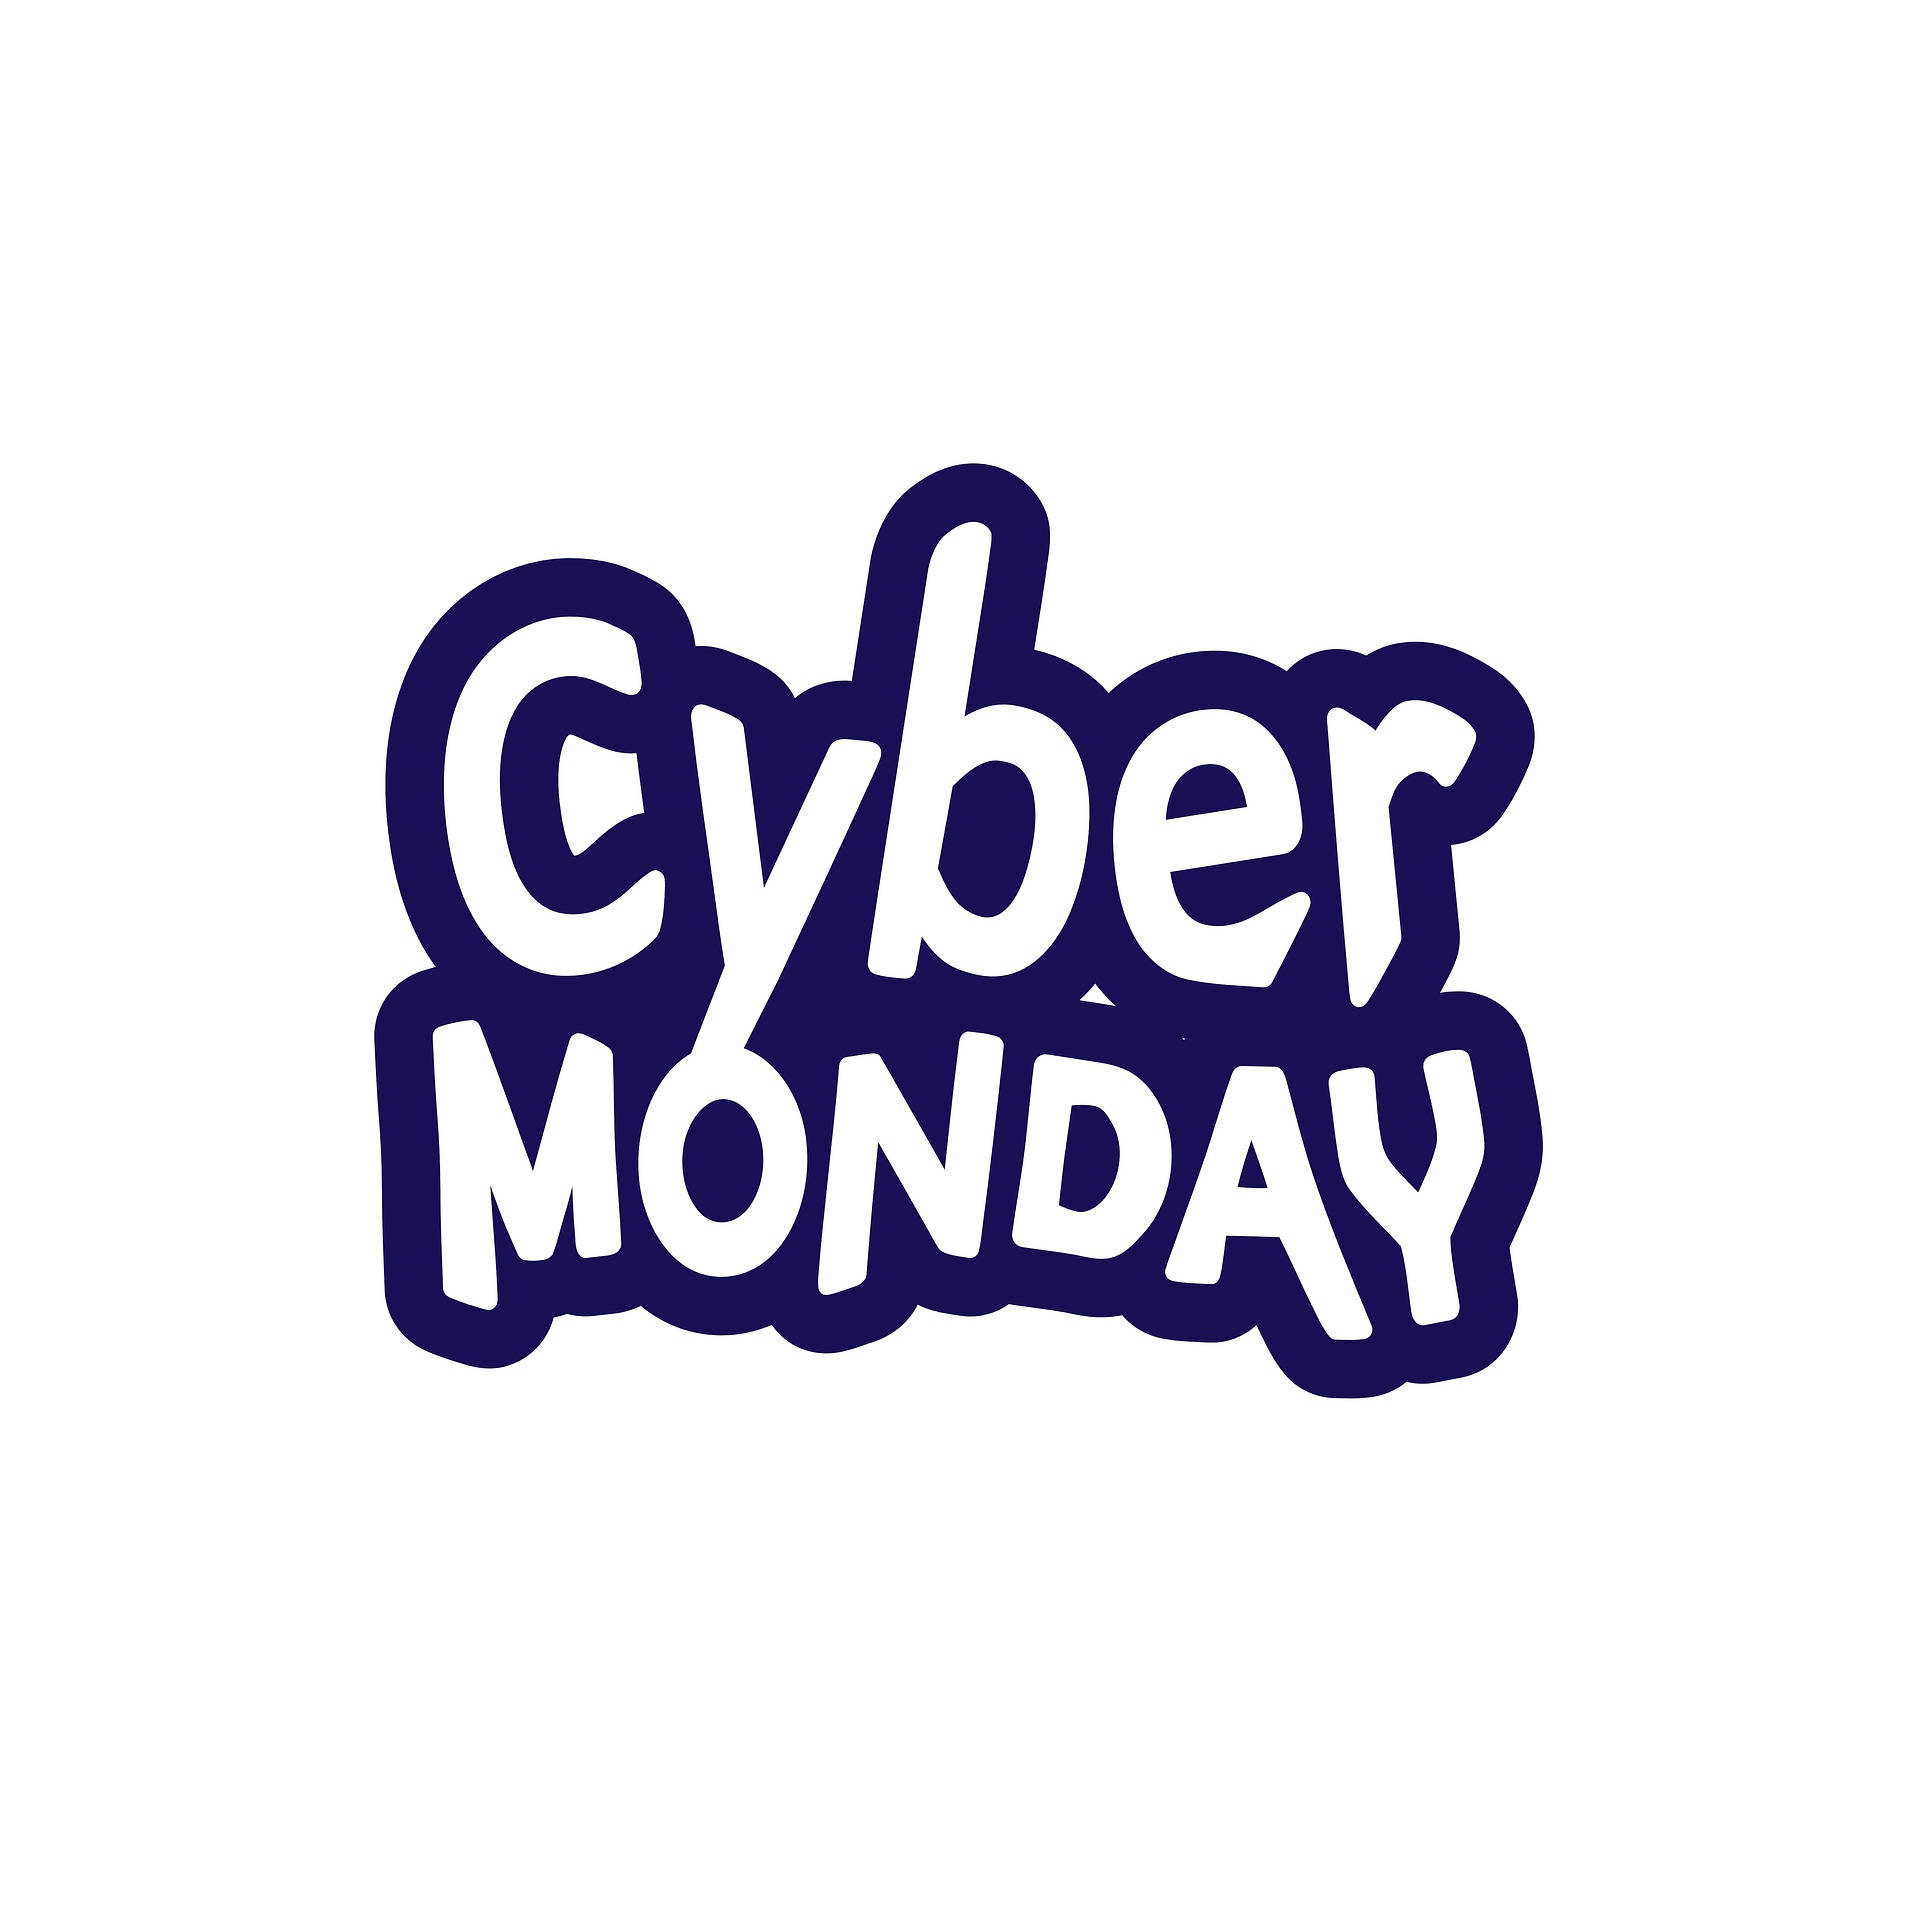 Cyber Monday Stylised Sale Sign